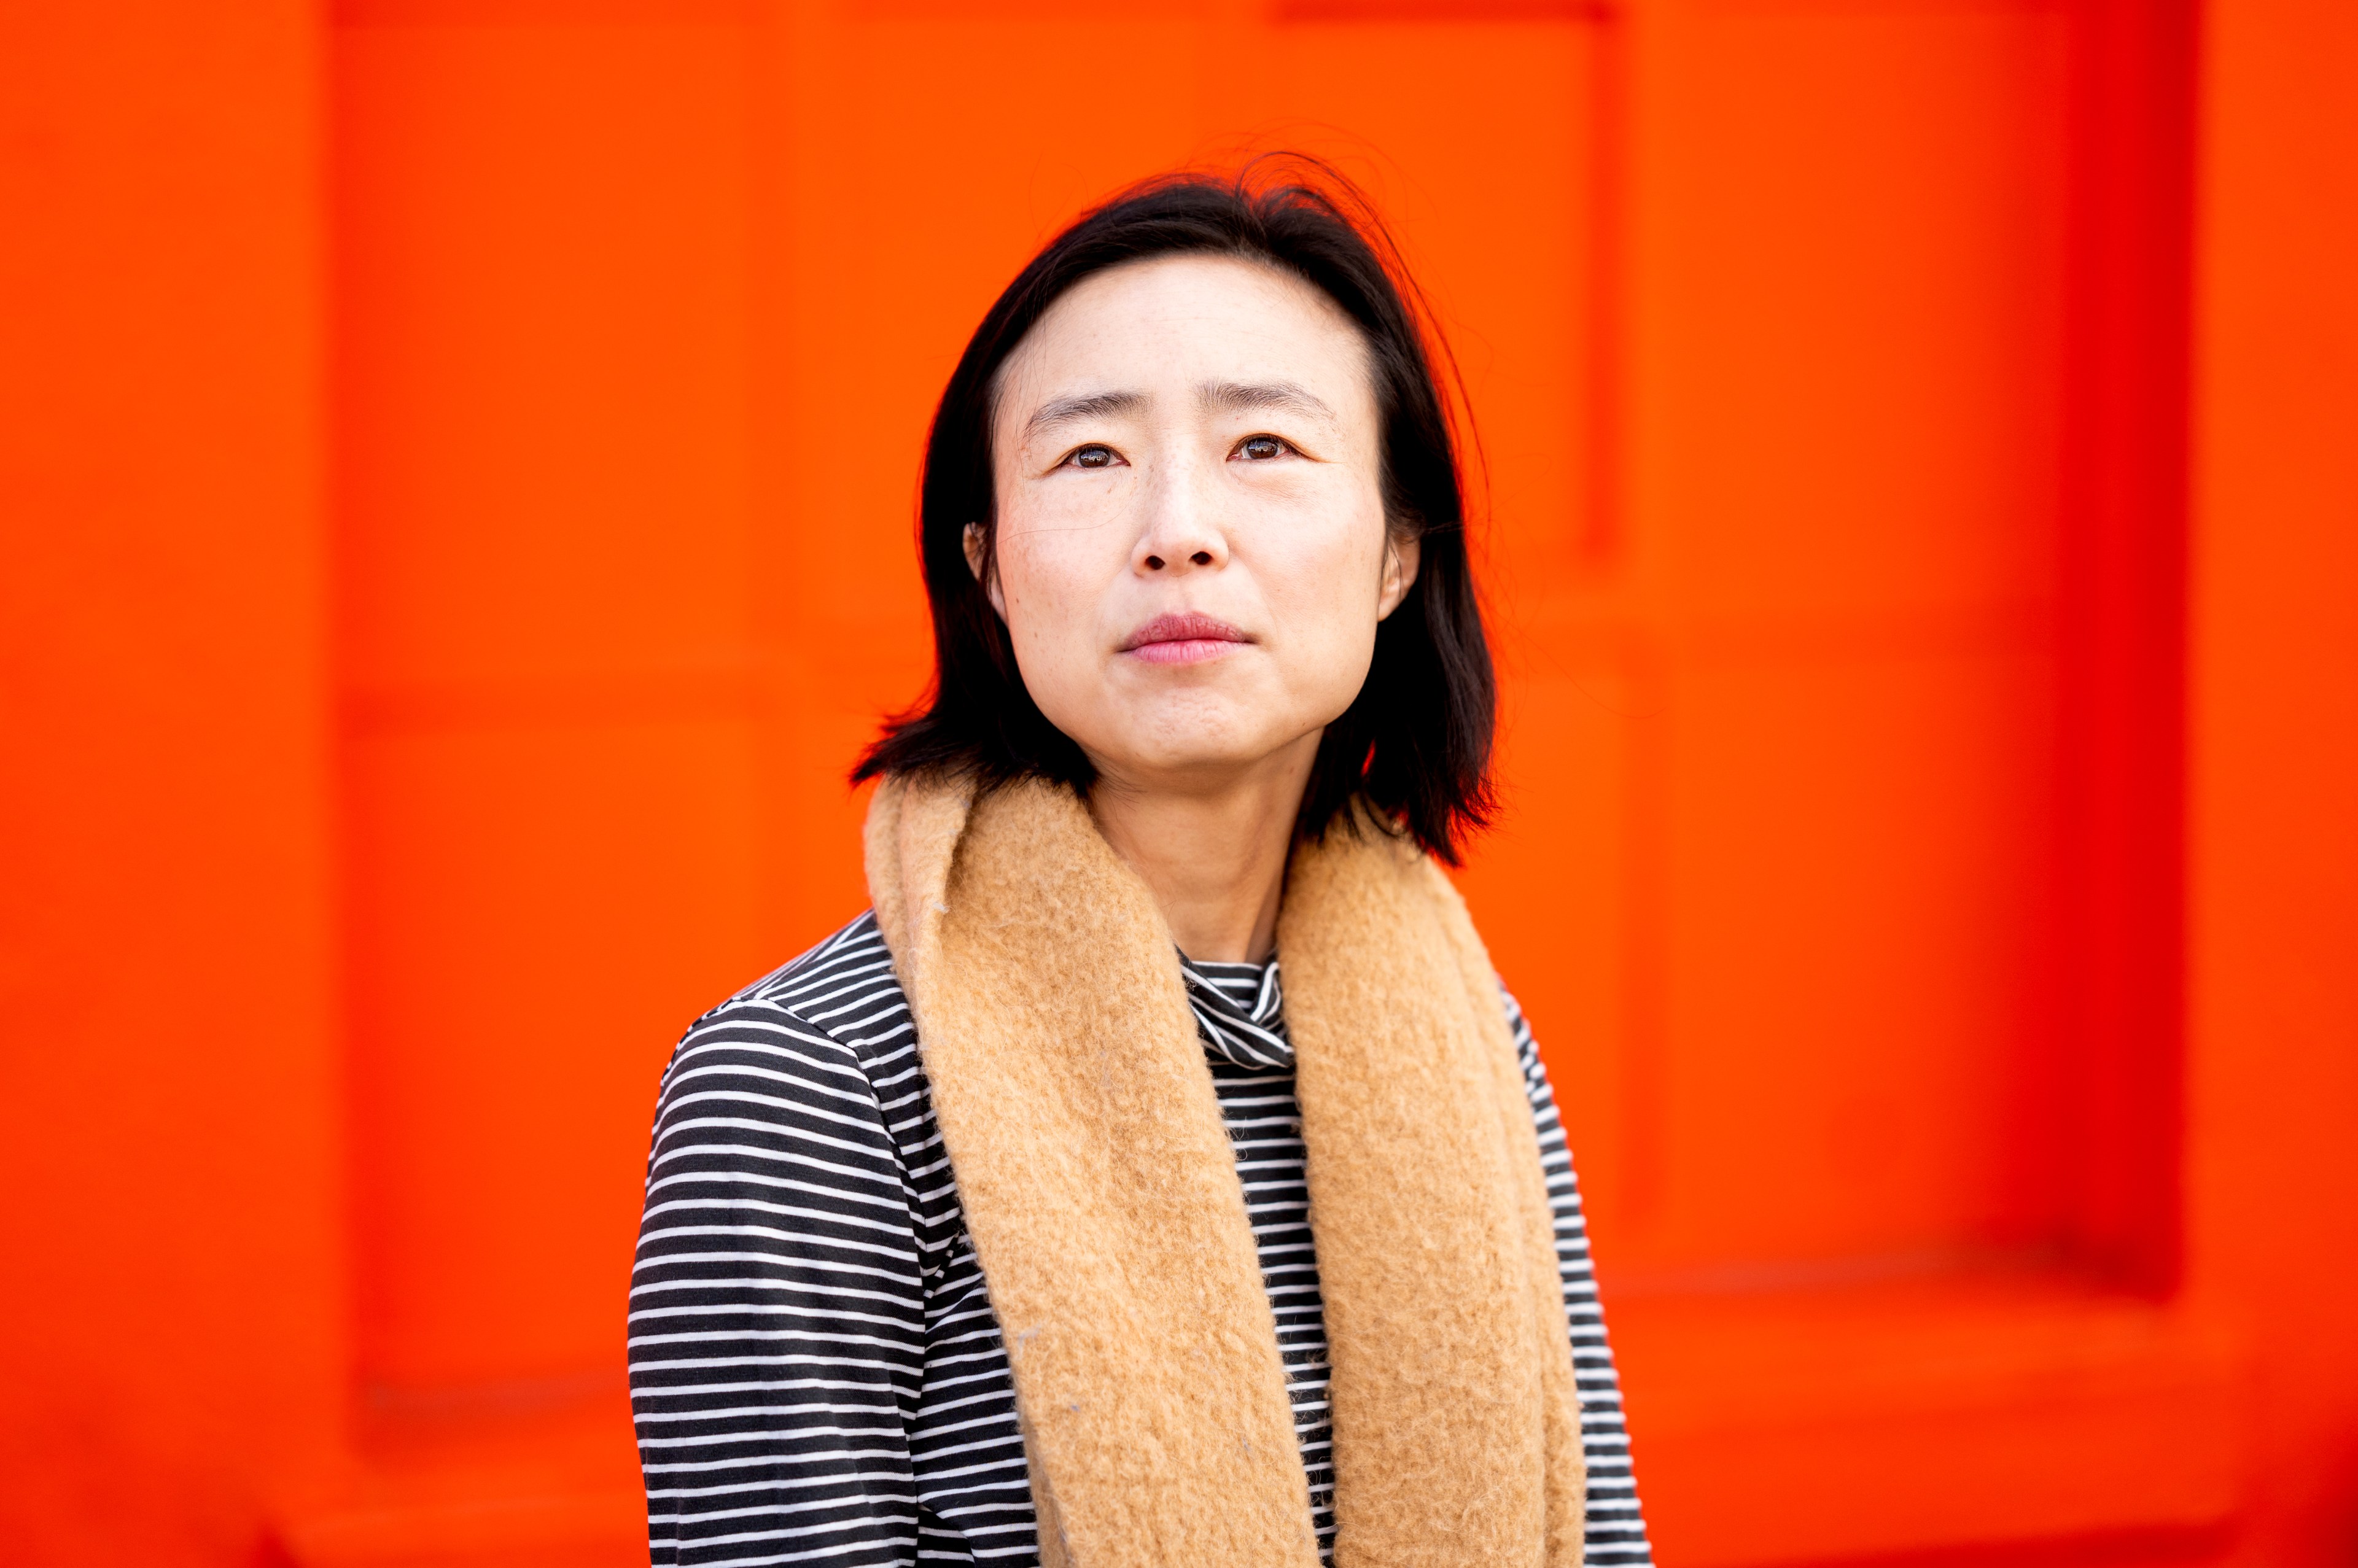 A woman in a striped top and beige scarf stands before a vibrant orange background.